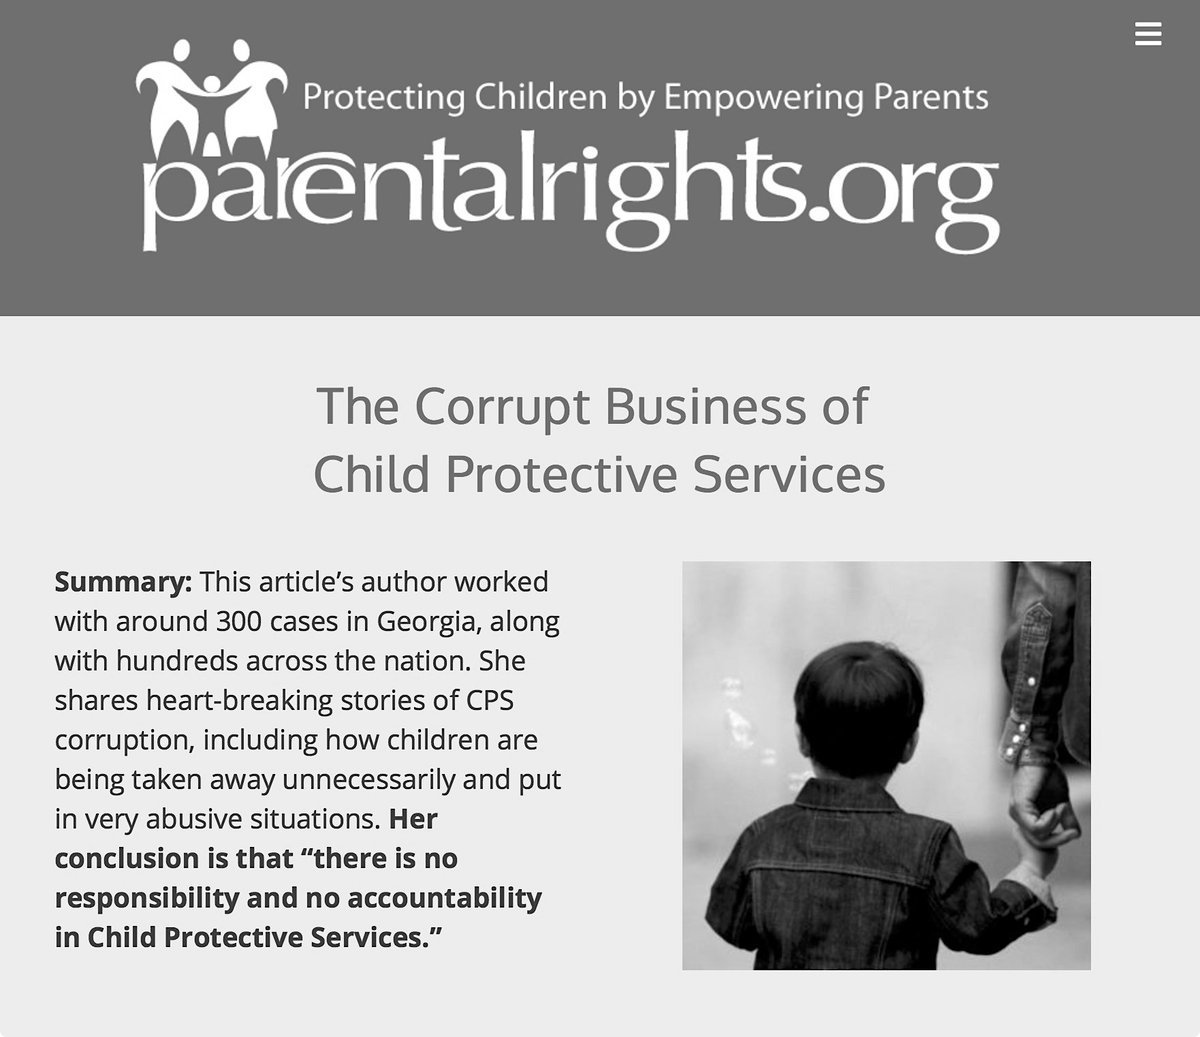 However, A Few Years Earlier, On November 16th, 2007, Senator Nancy Schaefer Released The Report 'The Corrupt Business Of Child Protective Services'. https://parentalrights.org/child_protective_services